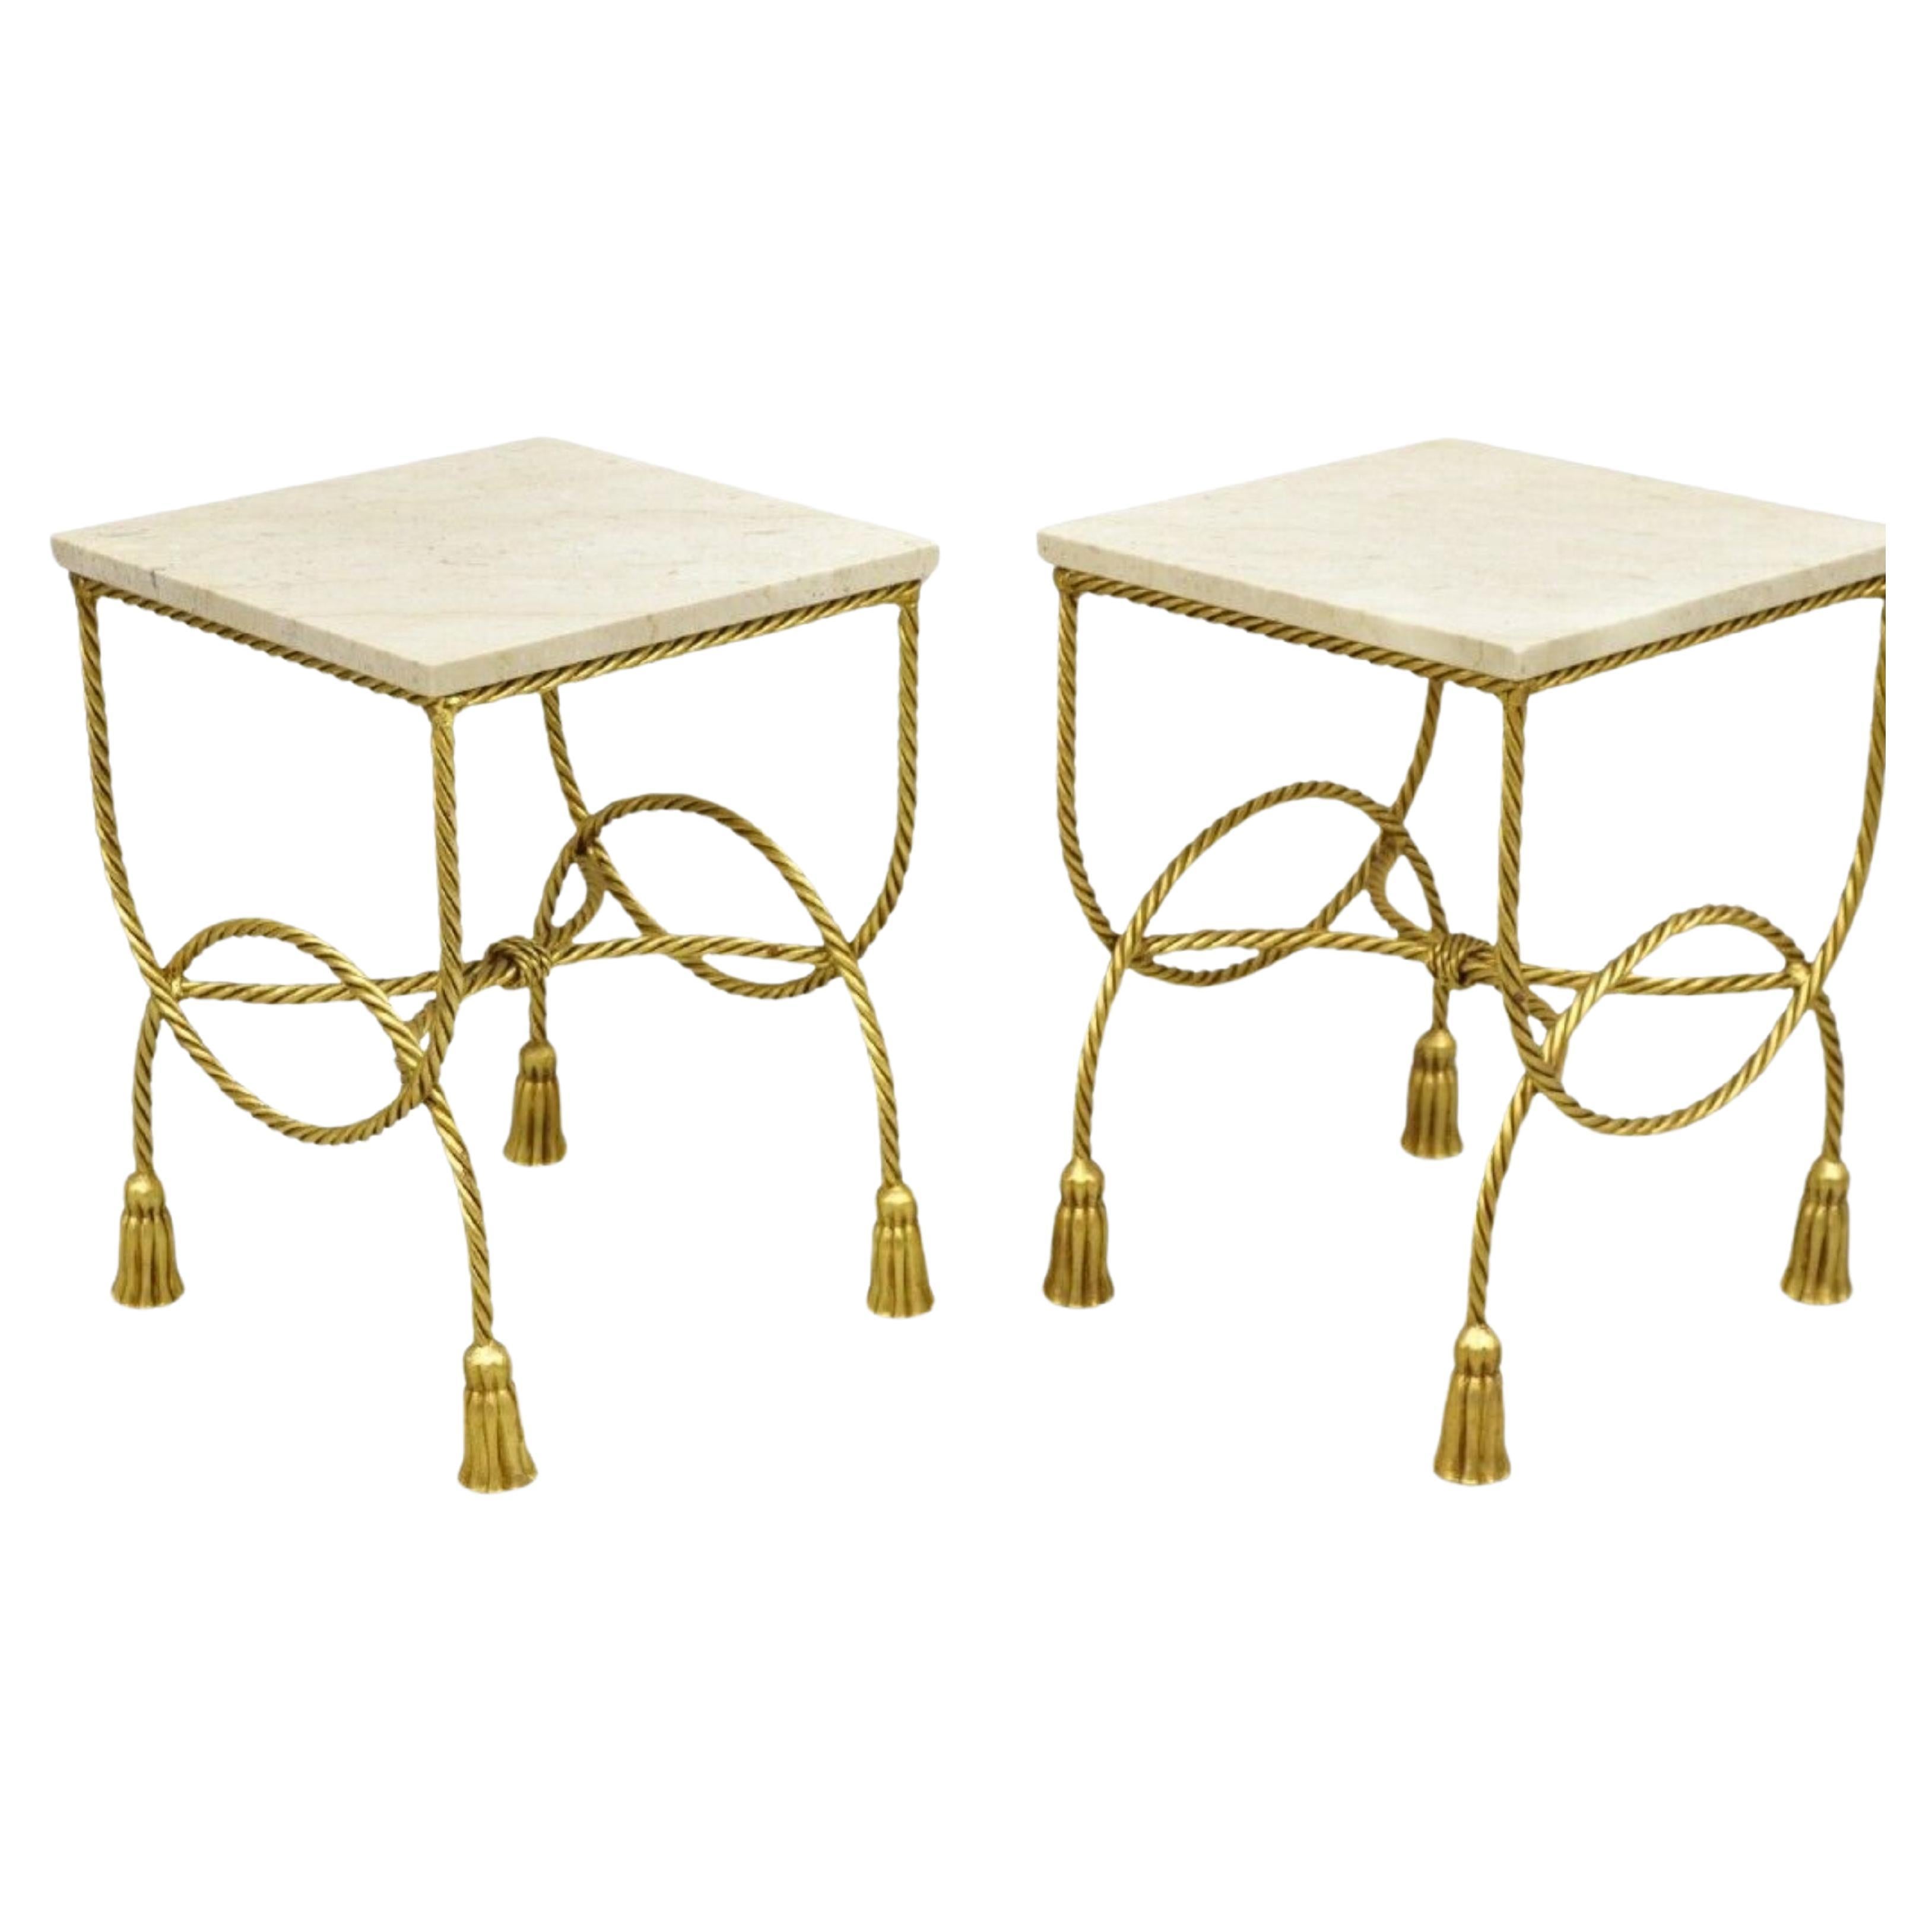 Italian Hollywood Regency Gold Gilt Iron Rope Tassel Marble Top Side Table Pair For Sale